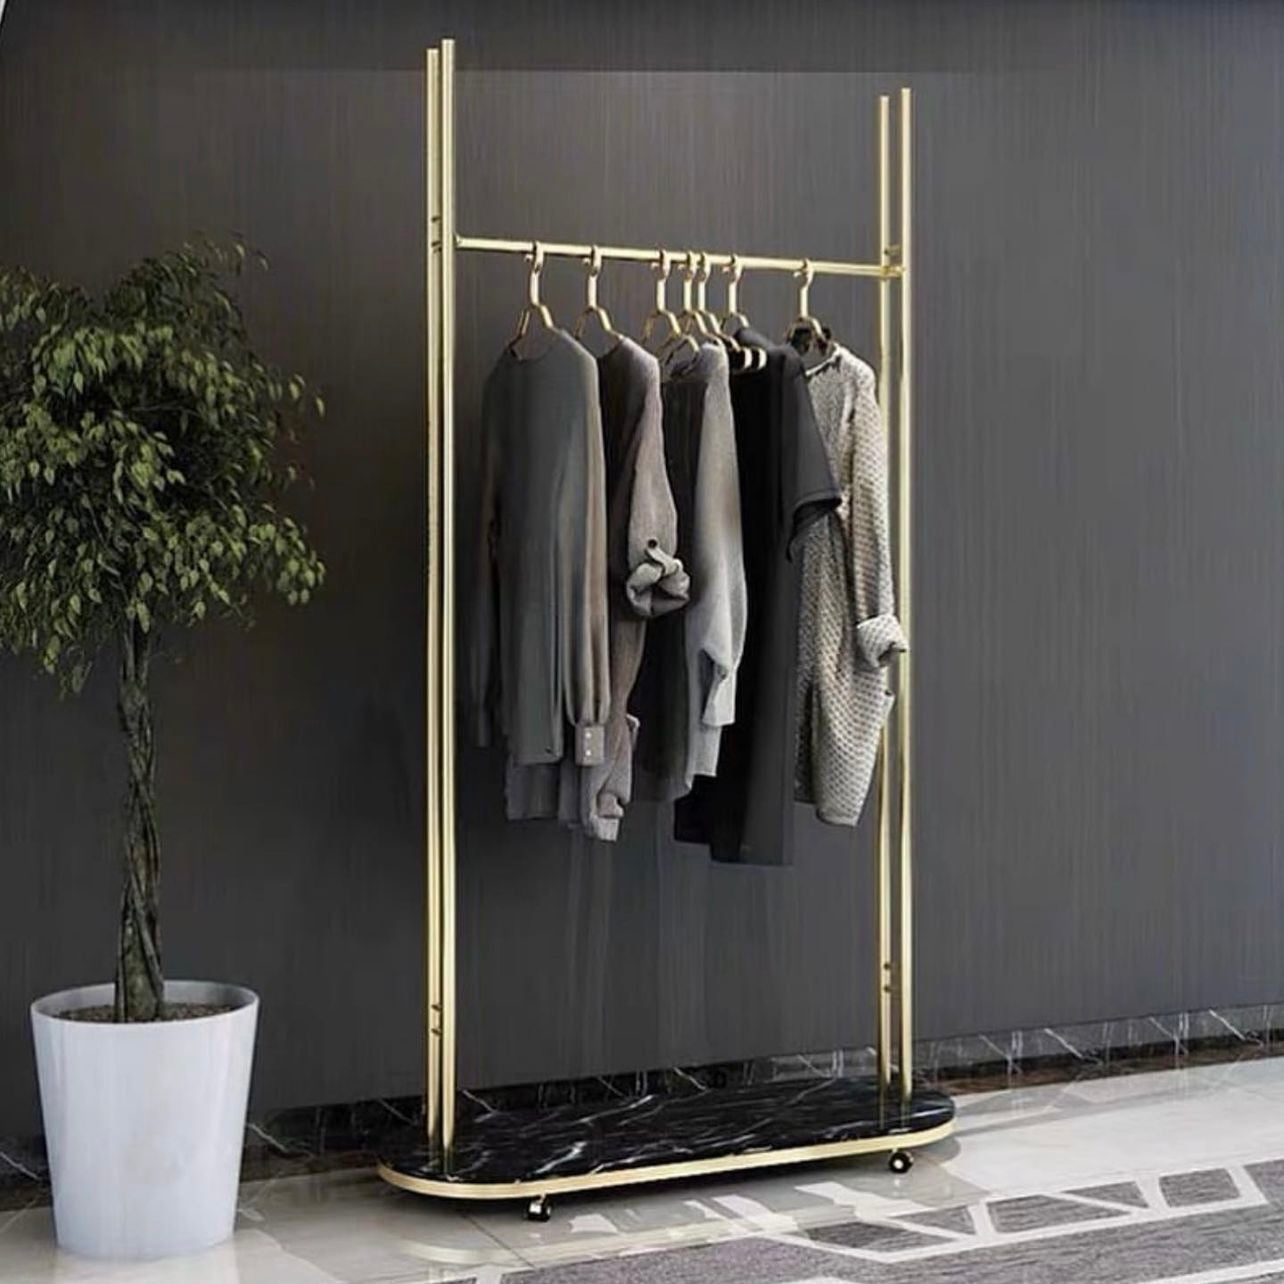 Hommie Marble Clothes Rack HBWR003